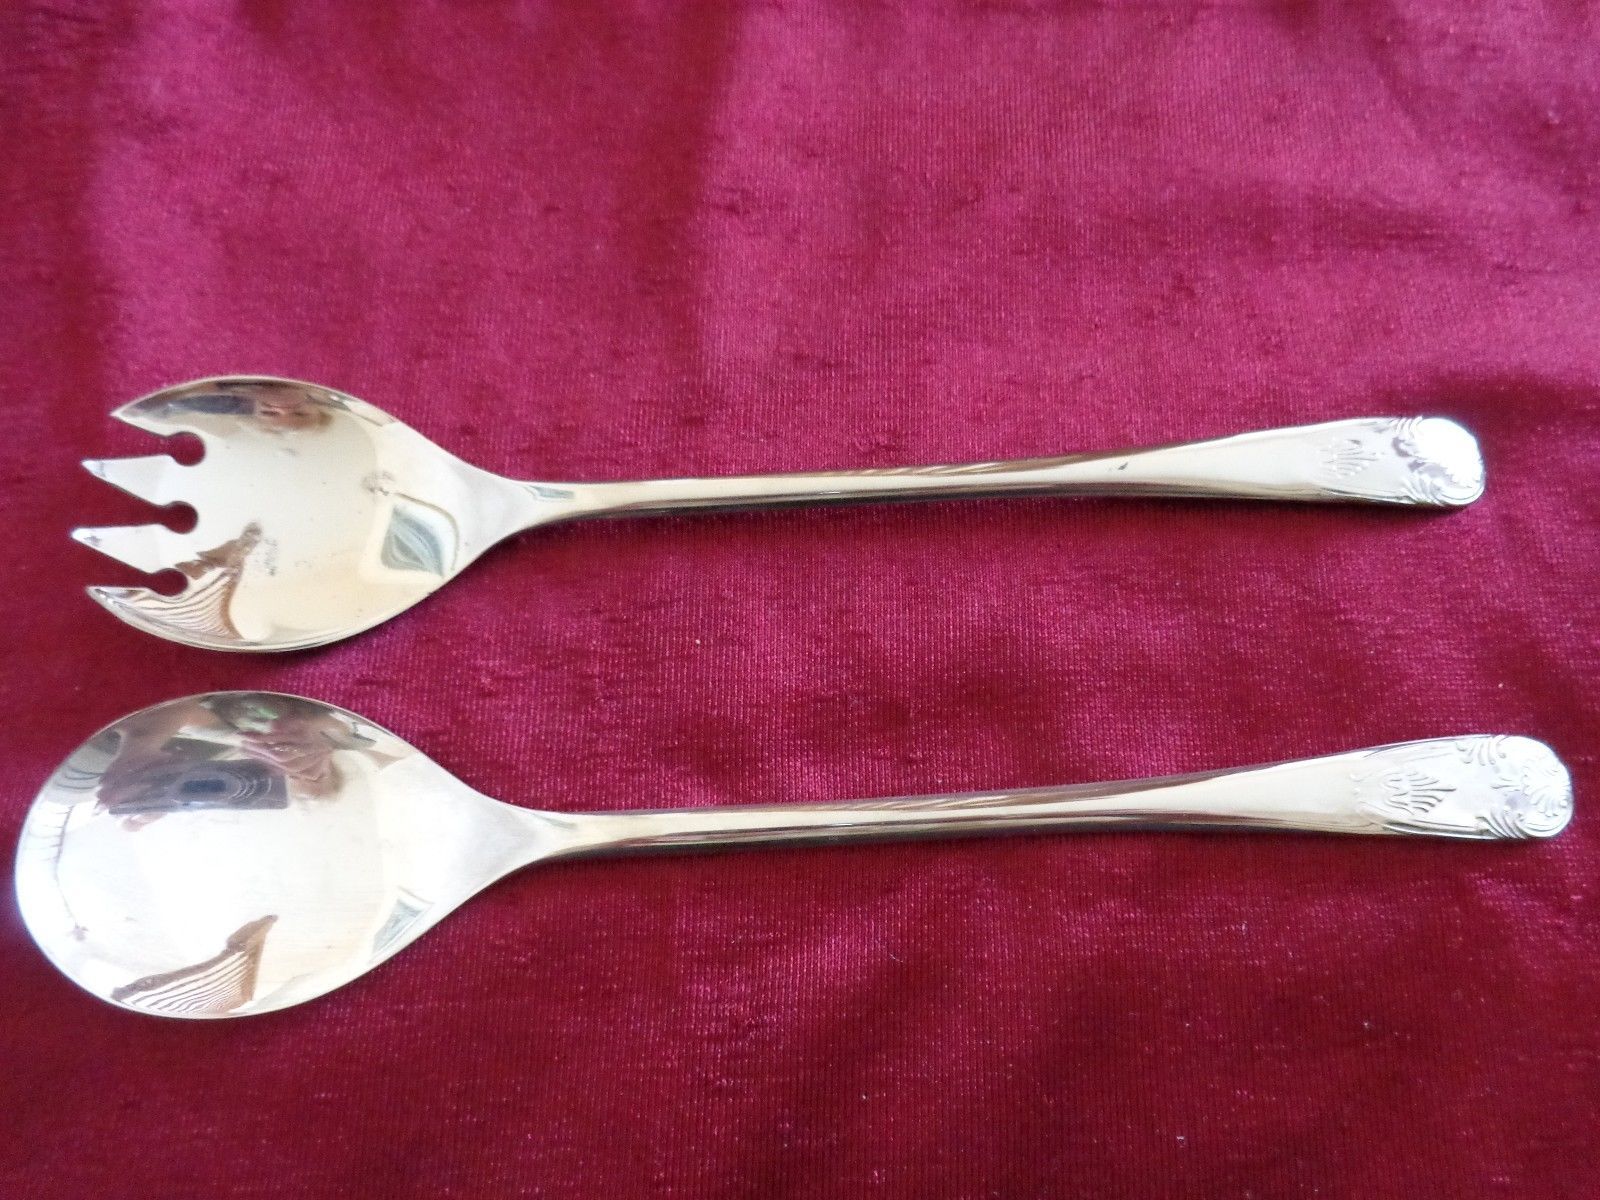 2 Silver-plated Serving Spoons. Made in ITALY. (#0777) - $21.99